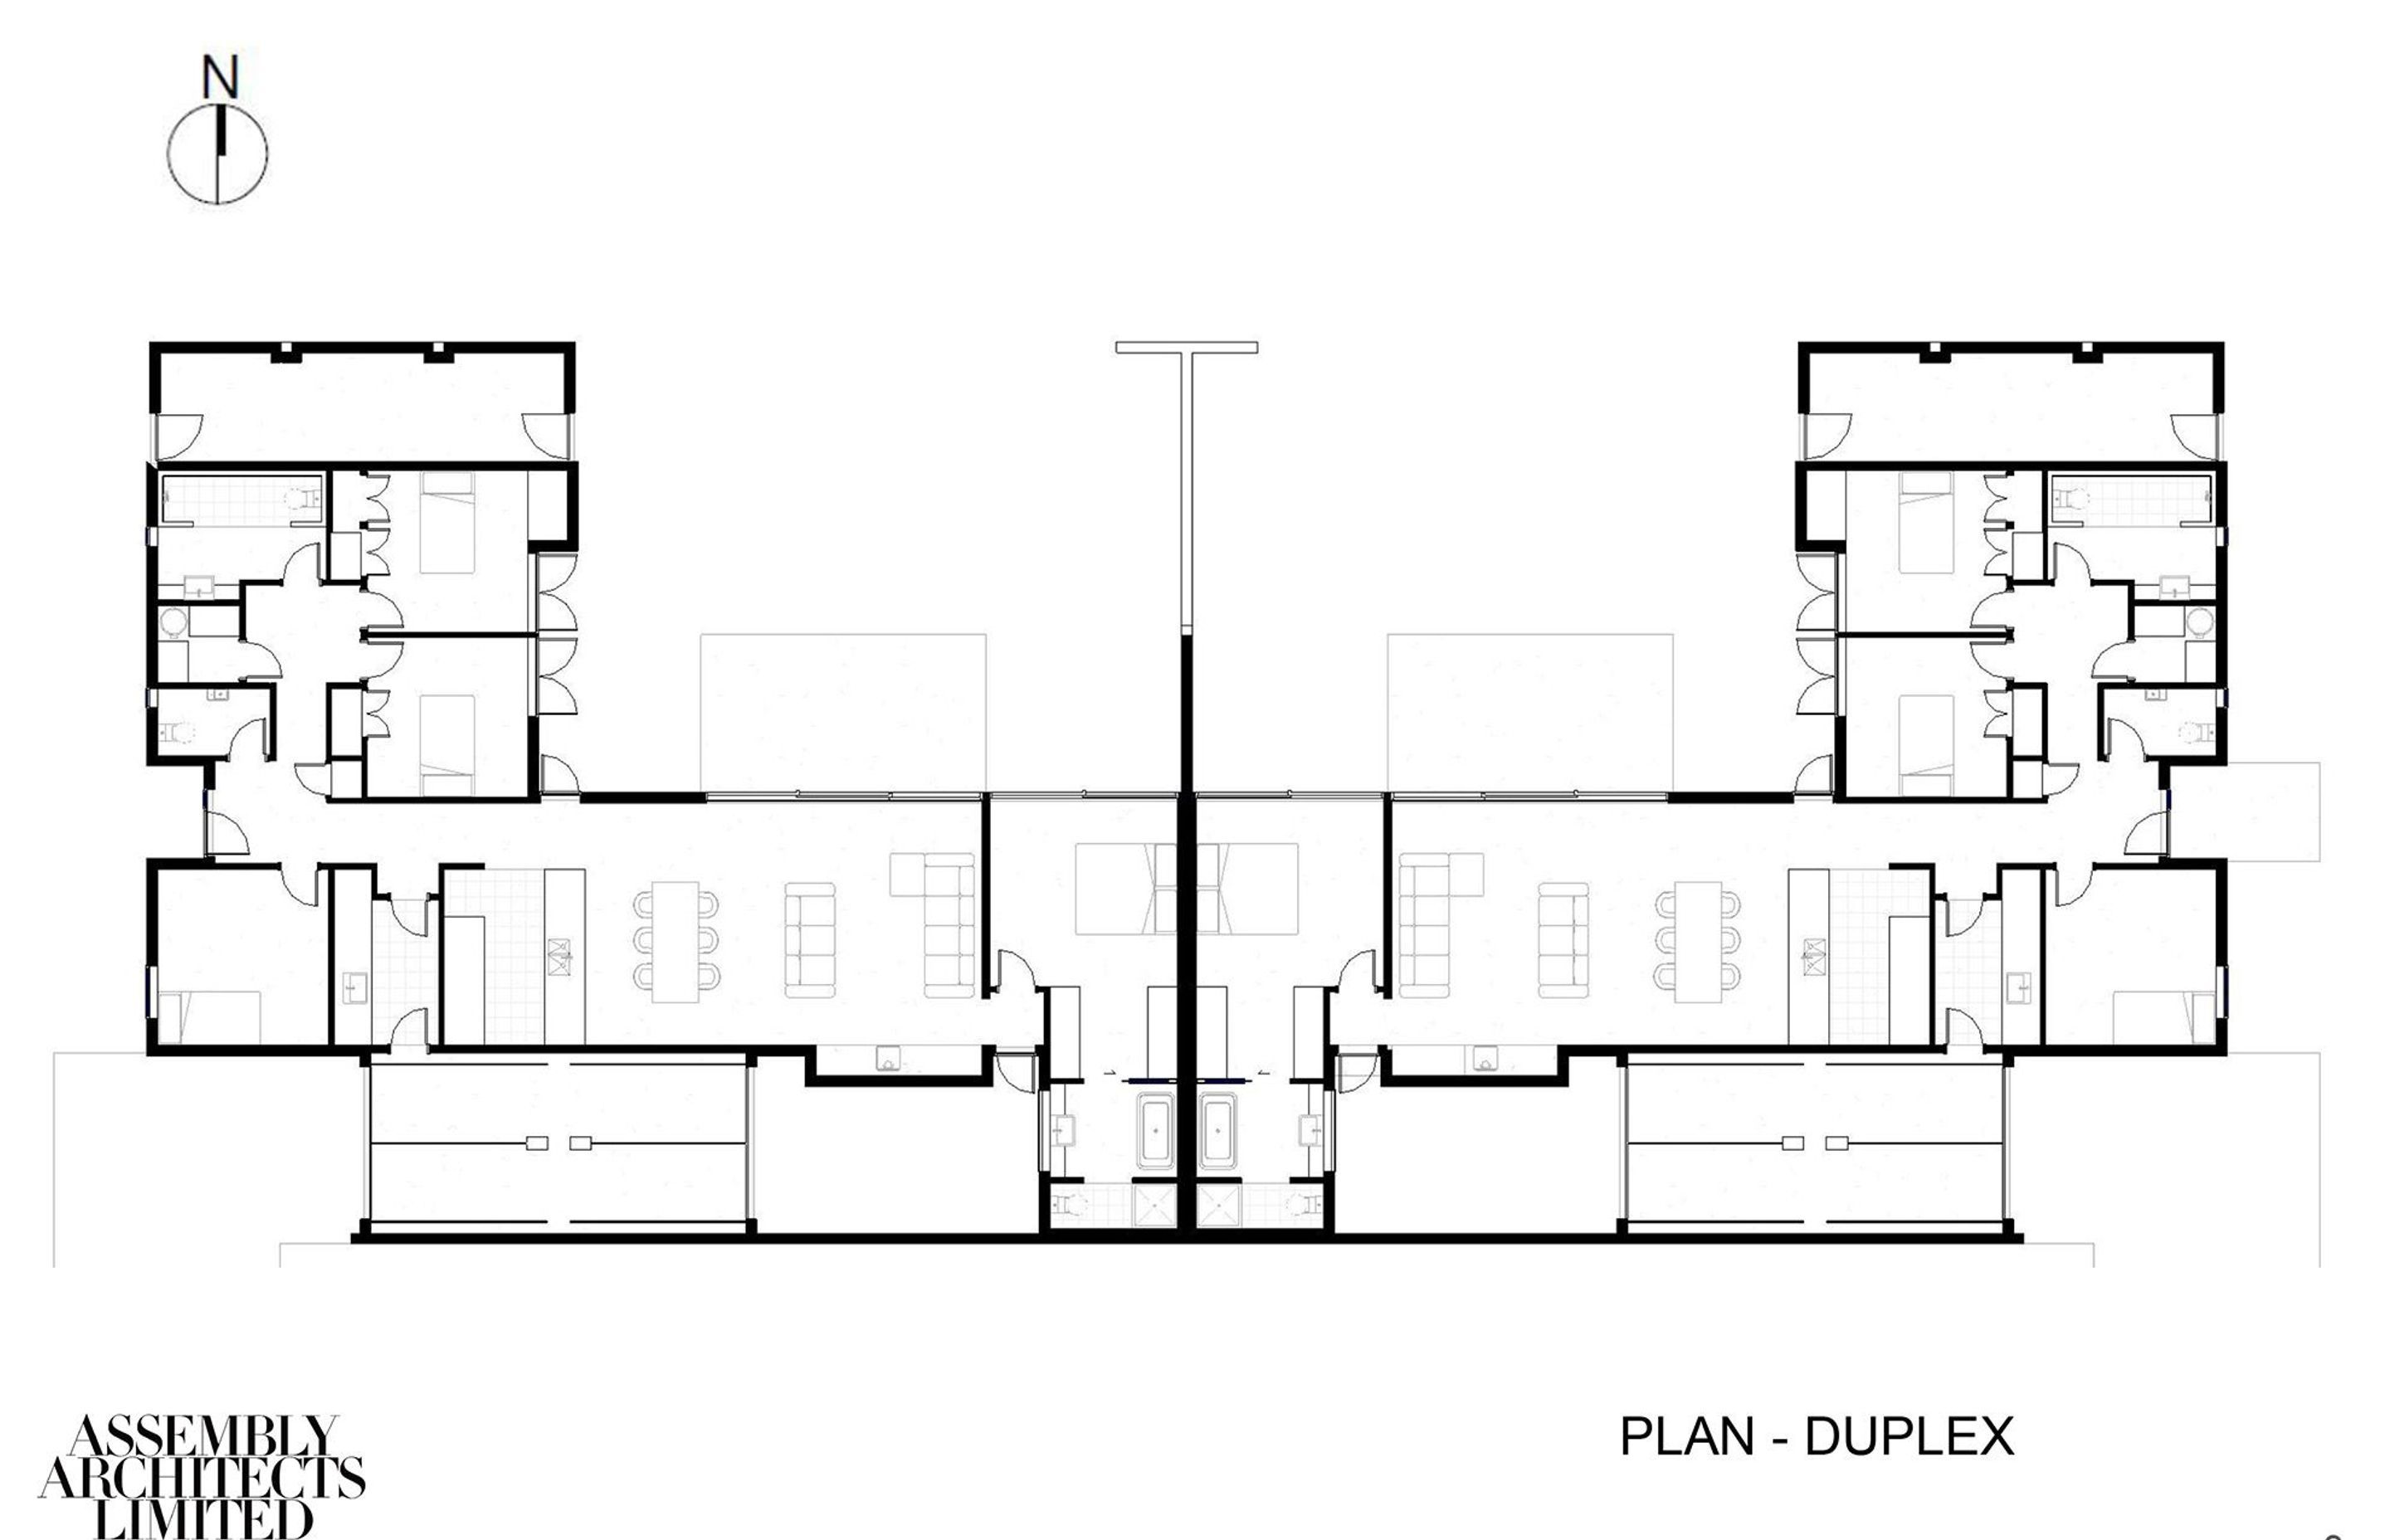 A plan of a typical duplex dwelling, by Assembly Architects.